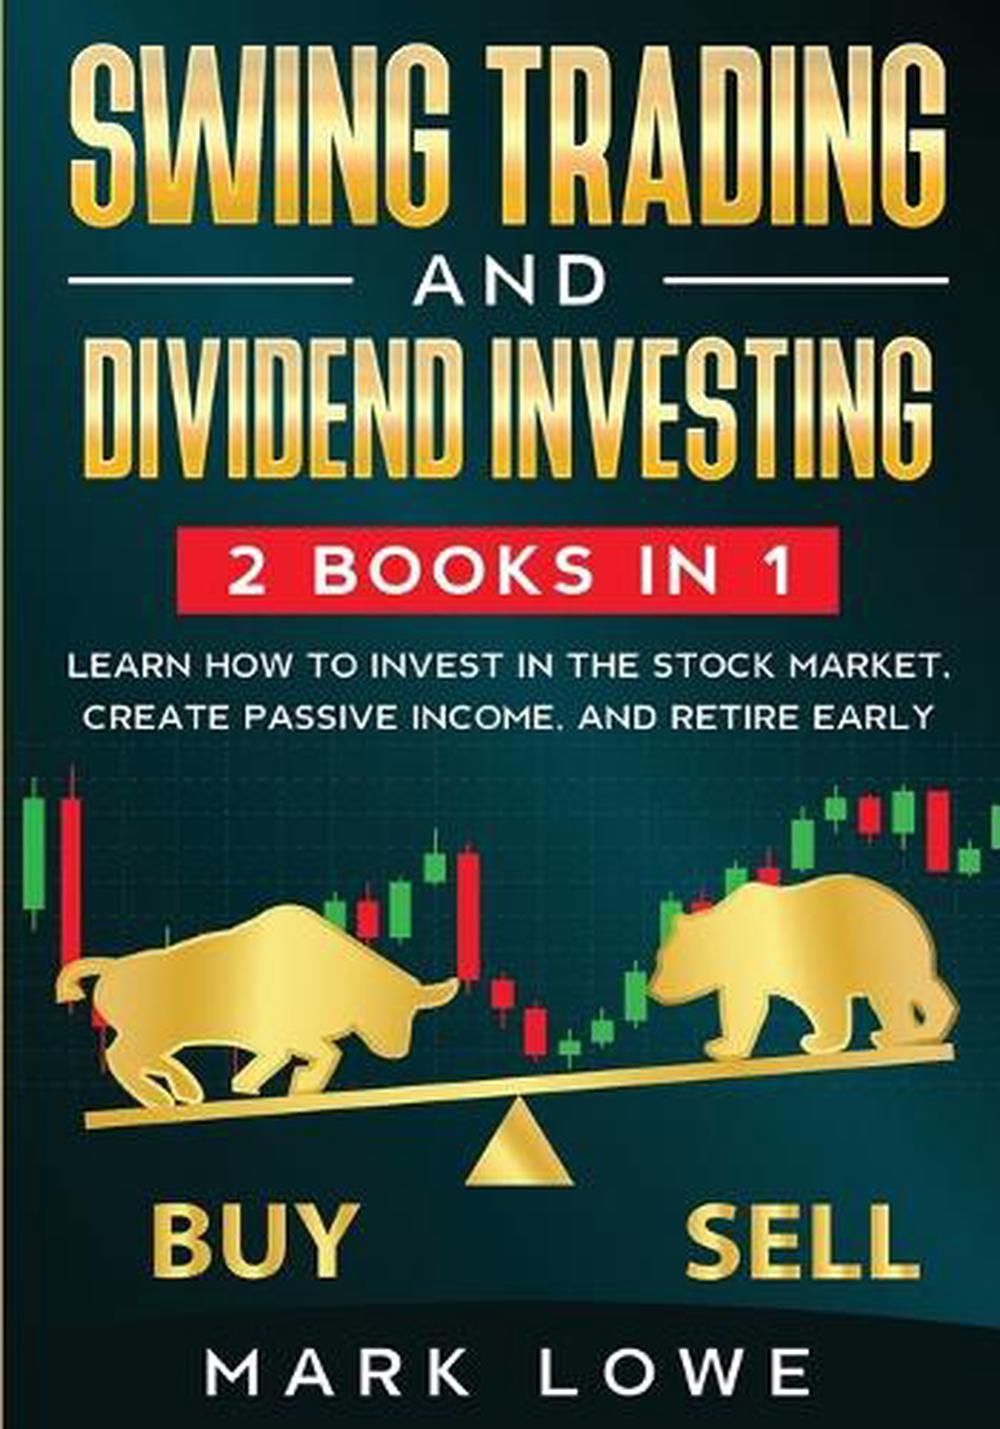 Swing Trading: and Dividend Investing: 2 Books Compilation - Learn How